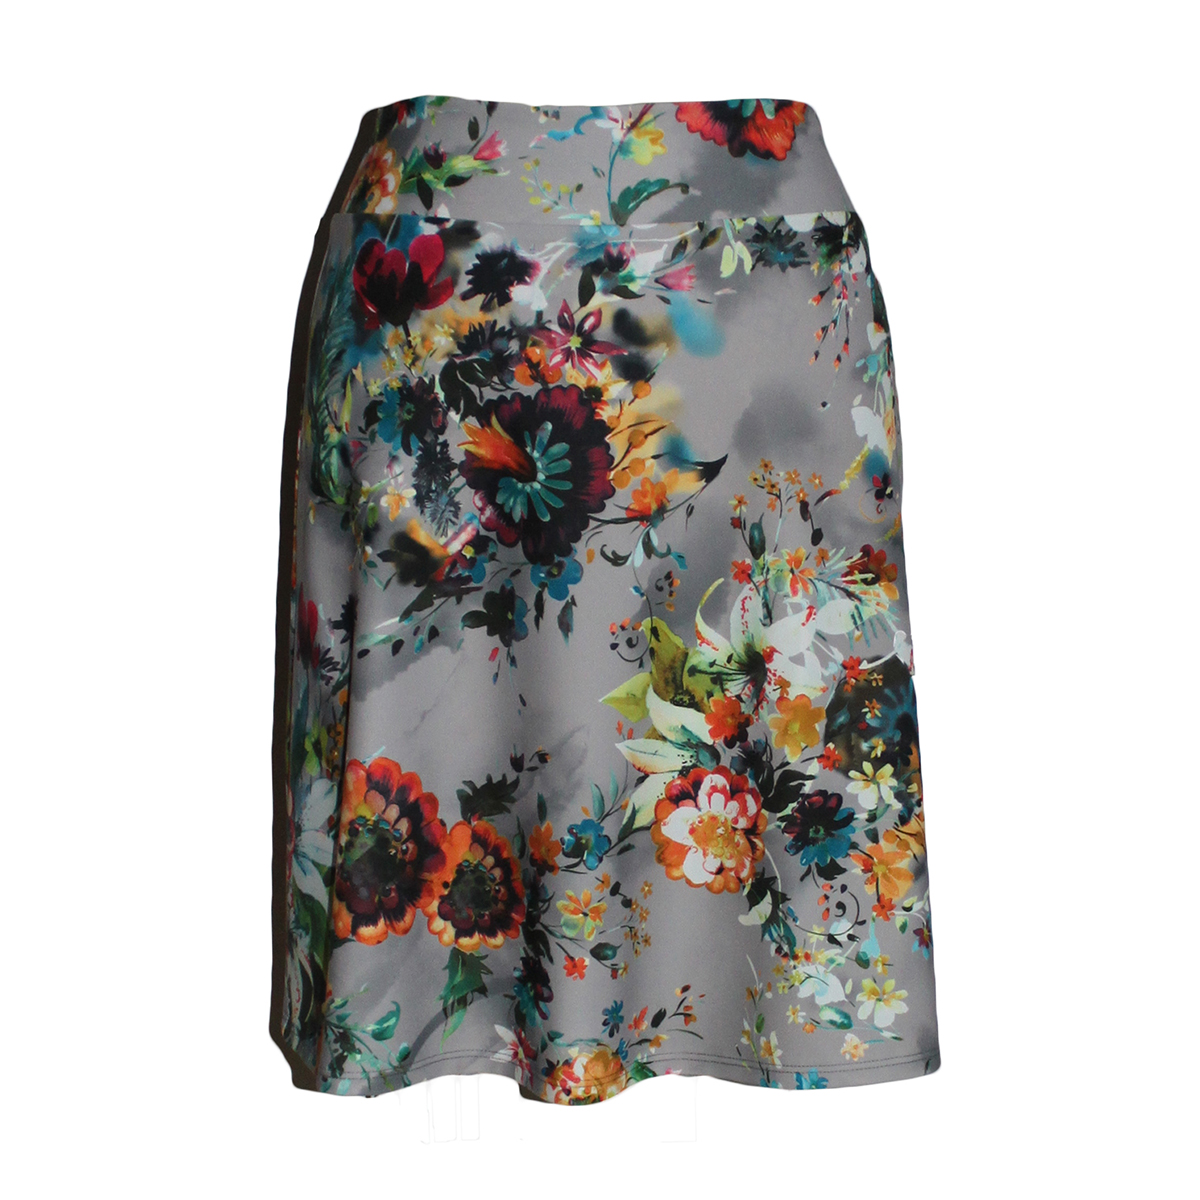 Travel Skirt in Vintage Floral Gray and Bright Multicolor Print ...